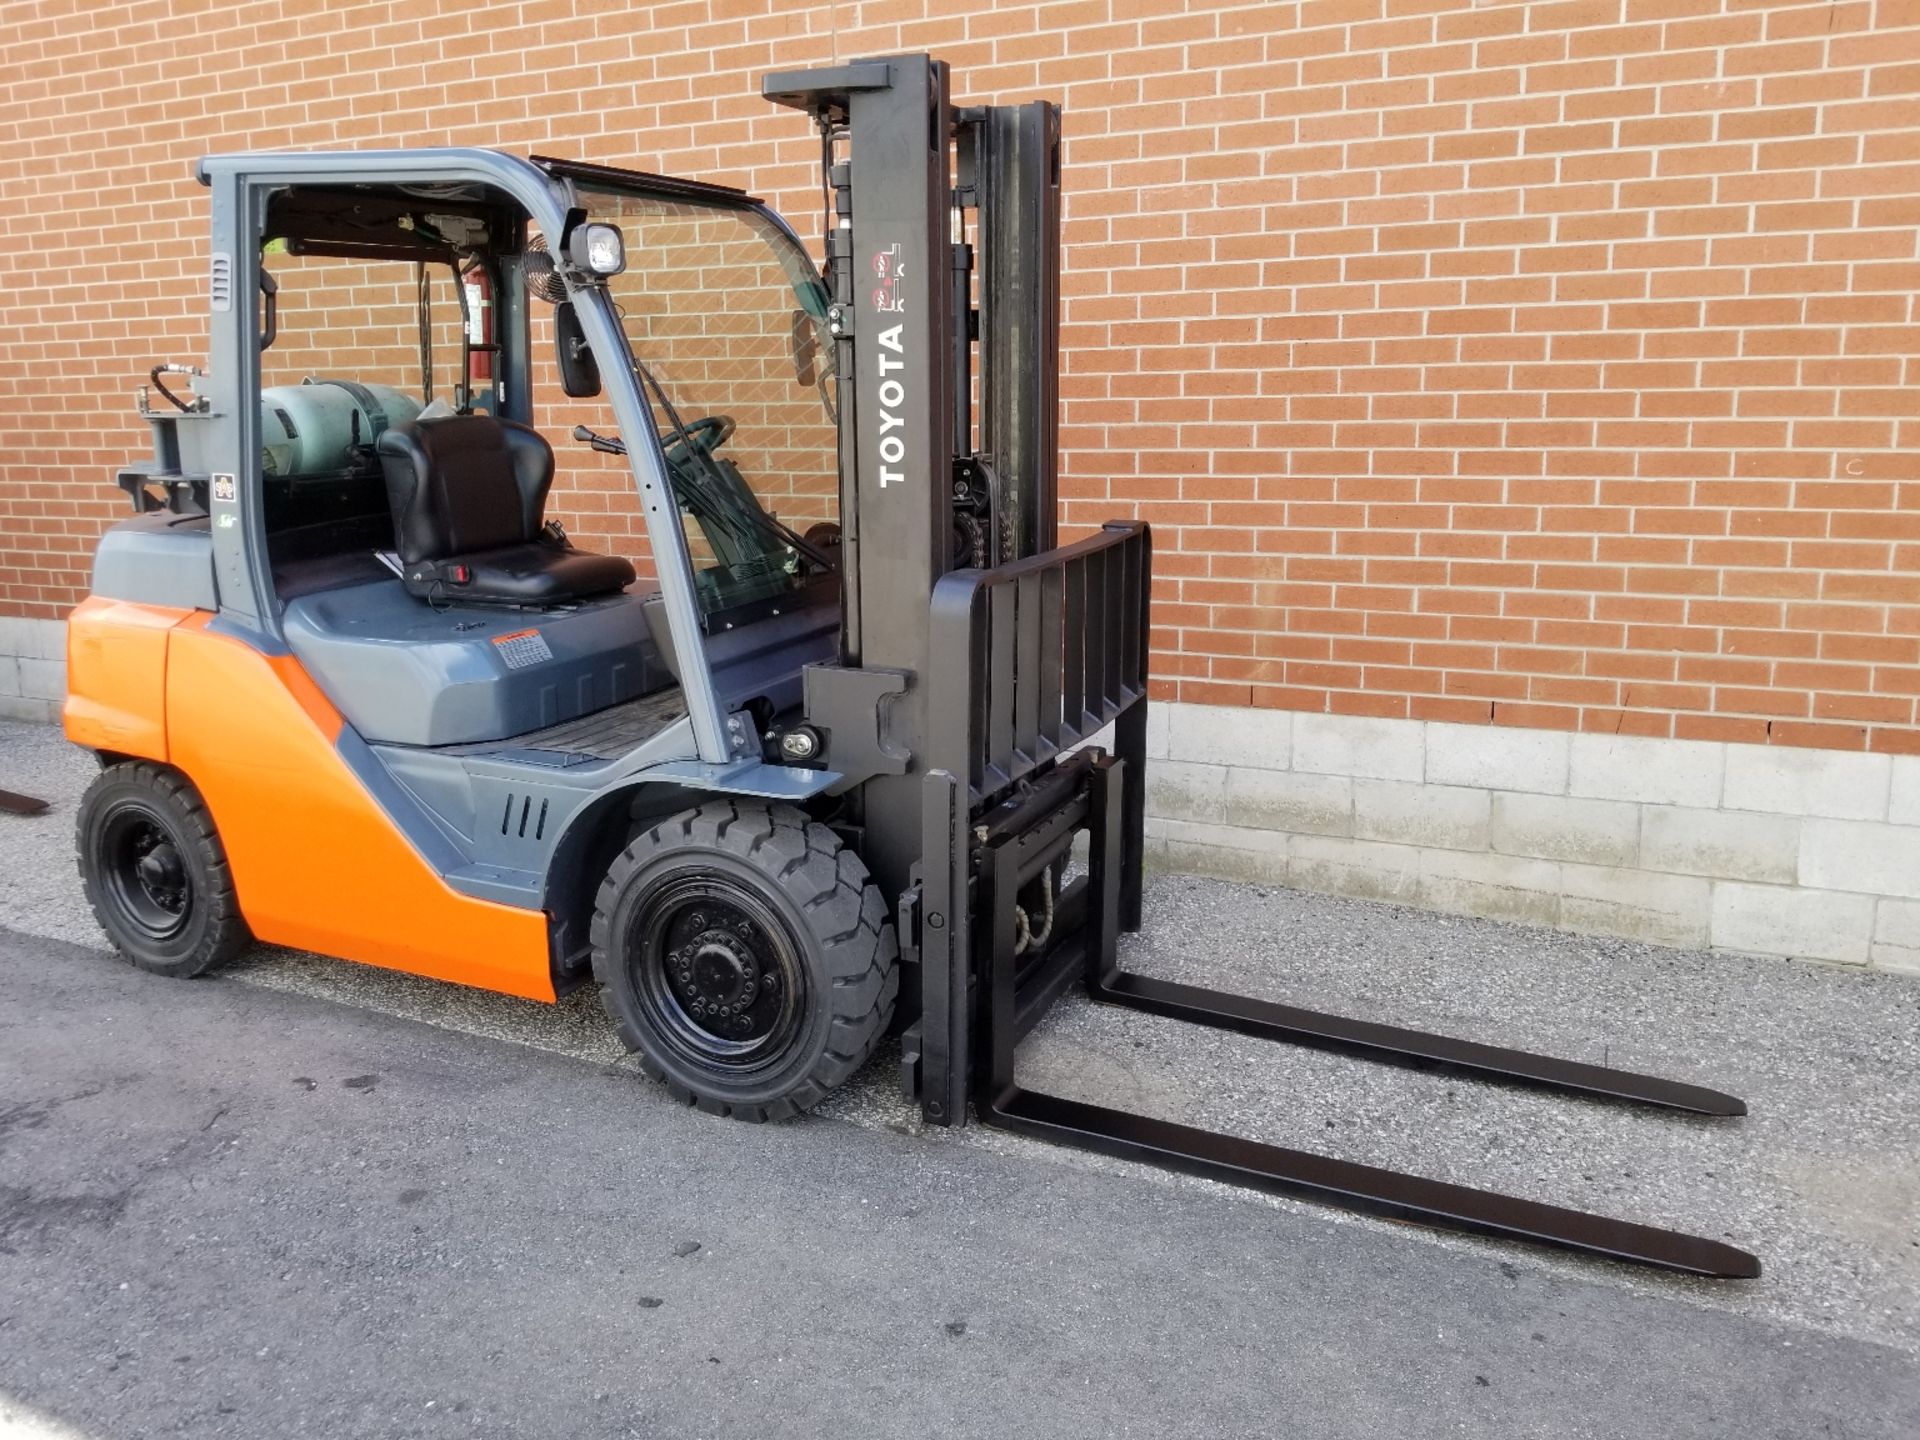 TOYOTA (2014) 8FG35U LPG FORKLIFT WITH 8000 LB. CAPACITY, 132" MAX. VERTICAL LIFT, SIDE SHIFT,